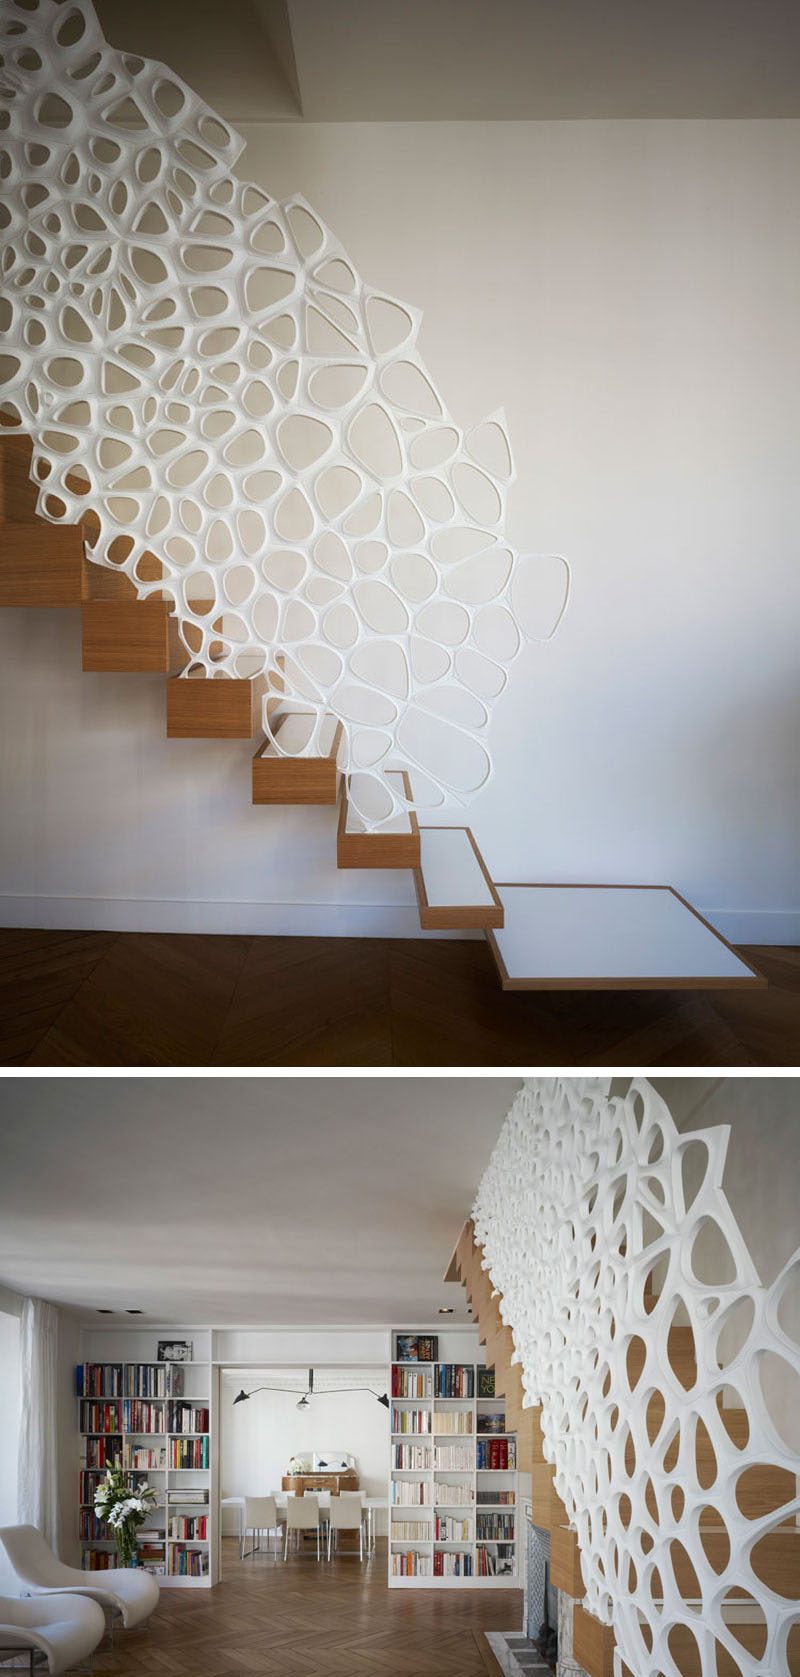 This white sculptural railing running the length of the staircase is made from Corian to make sure it's strong, durable, and able to withstand lots of use over the years.